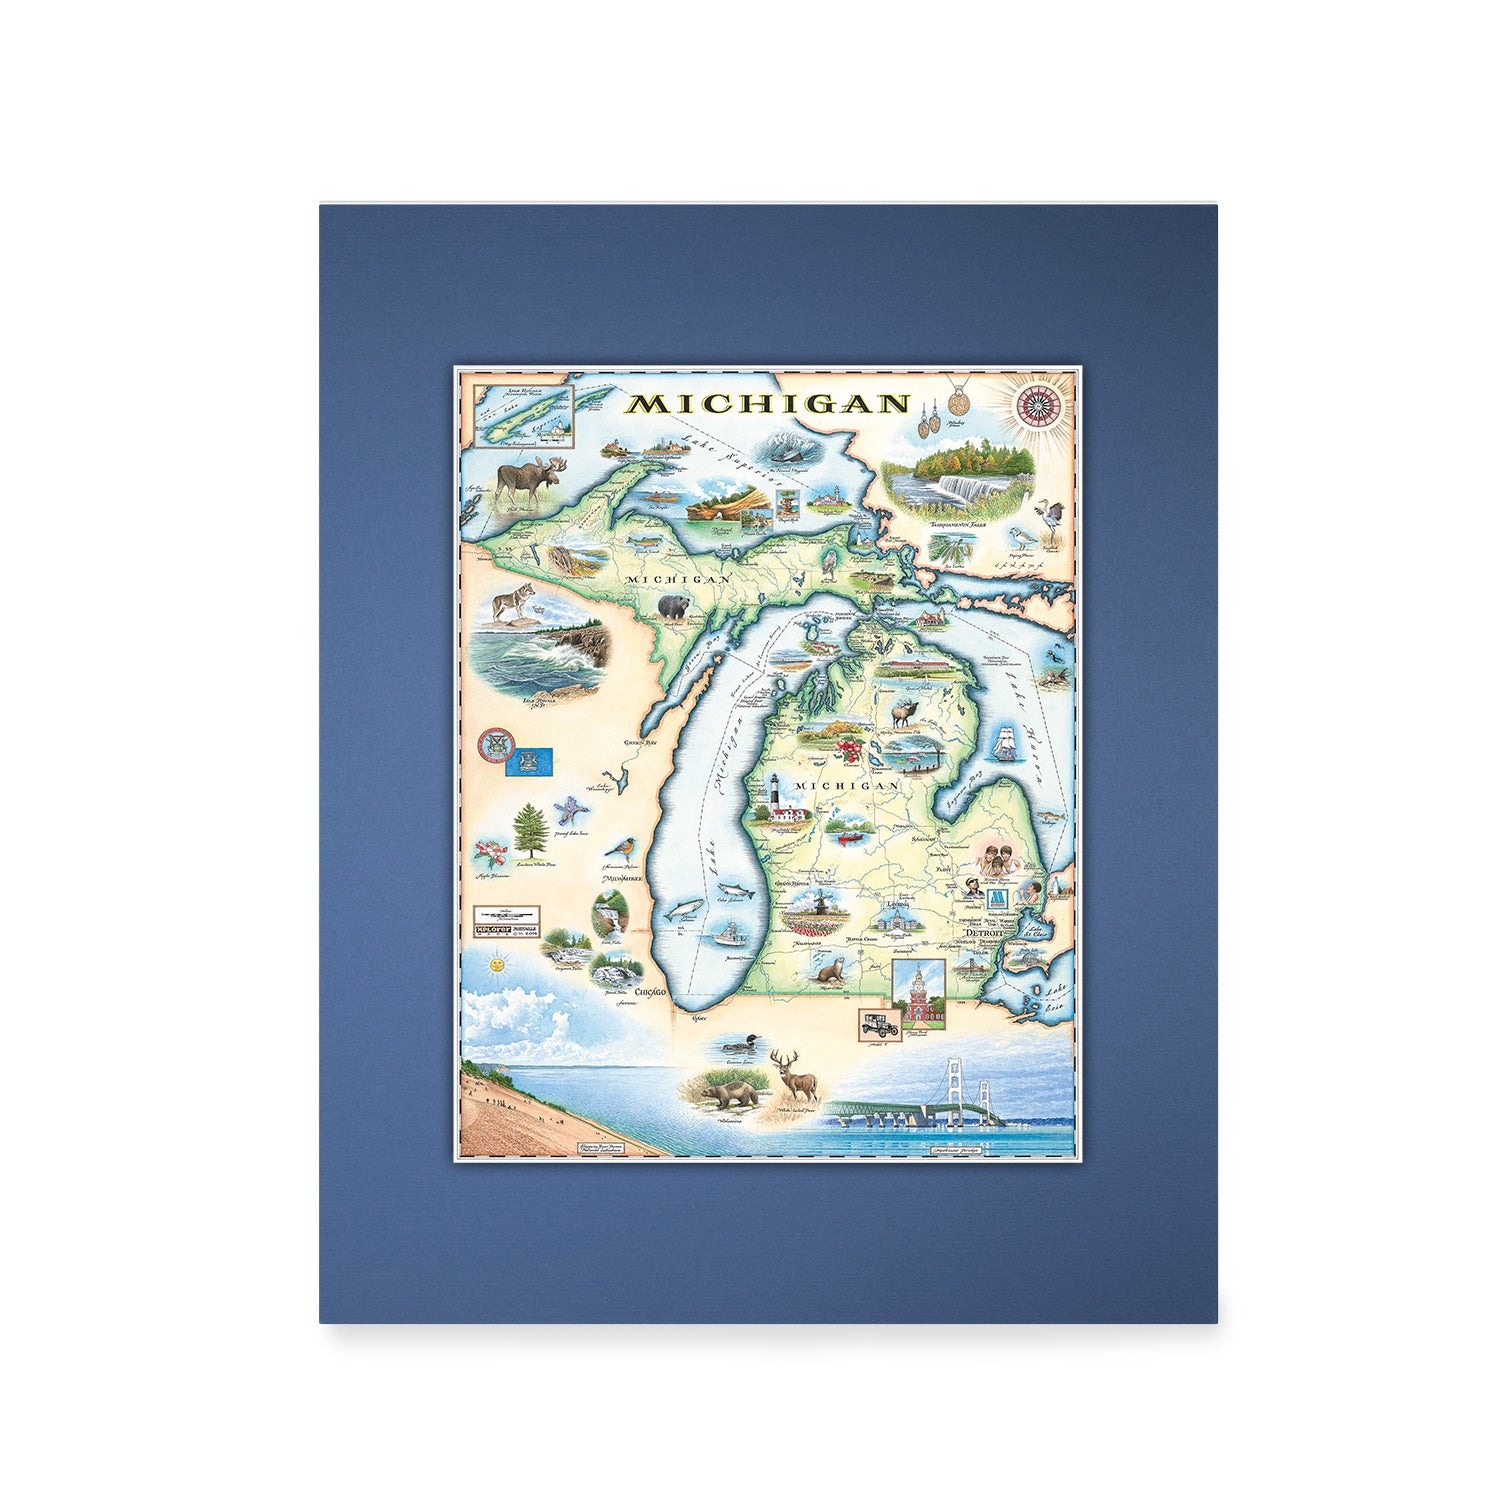 Michigan State Mini-Map by Xplorer Maps in Earth tones. Featuring the Great Lakes, Detroit, Ann Arbor, Grand Rapids, and Lansing. The Print also features Nature, animals, ducks, deer, fish, moose lighthouses, wolverines, and the Mackinac Bridge.